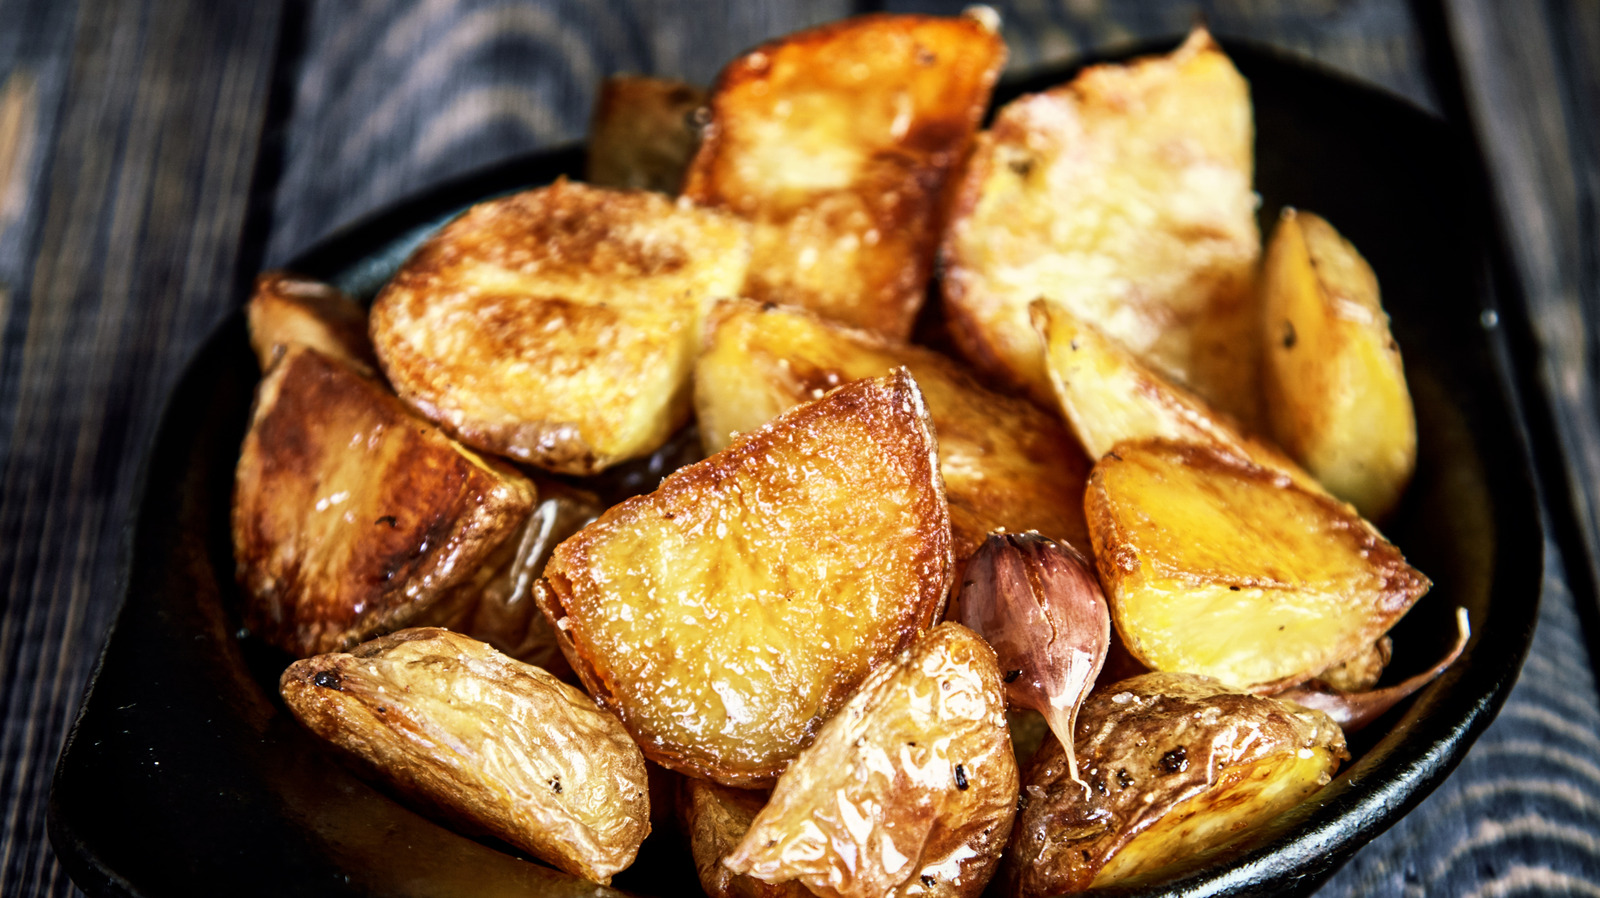 https://www.tastingtable.com/img/gallery/x-ways-to-add-more-flavor-to-roasted-potatoes/l-intro-1683734566.jpg